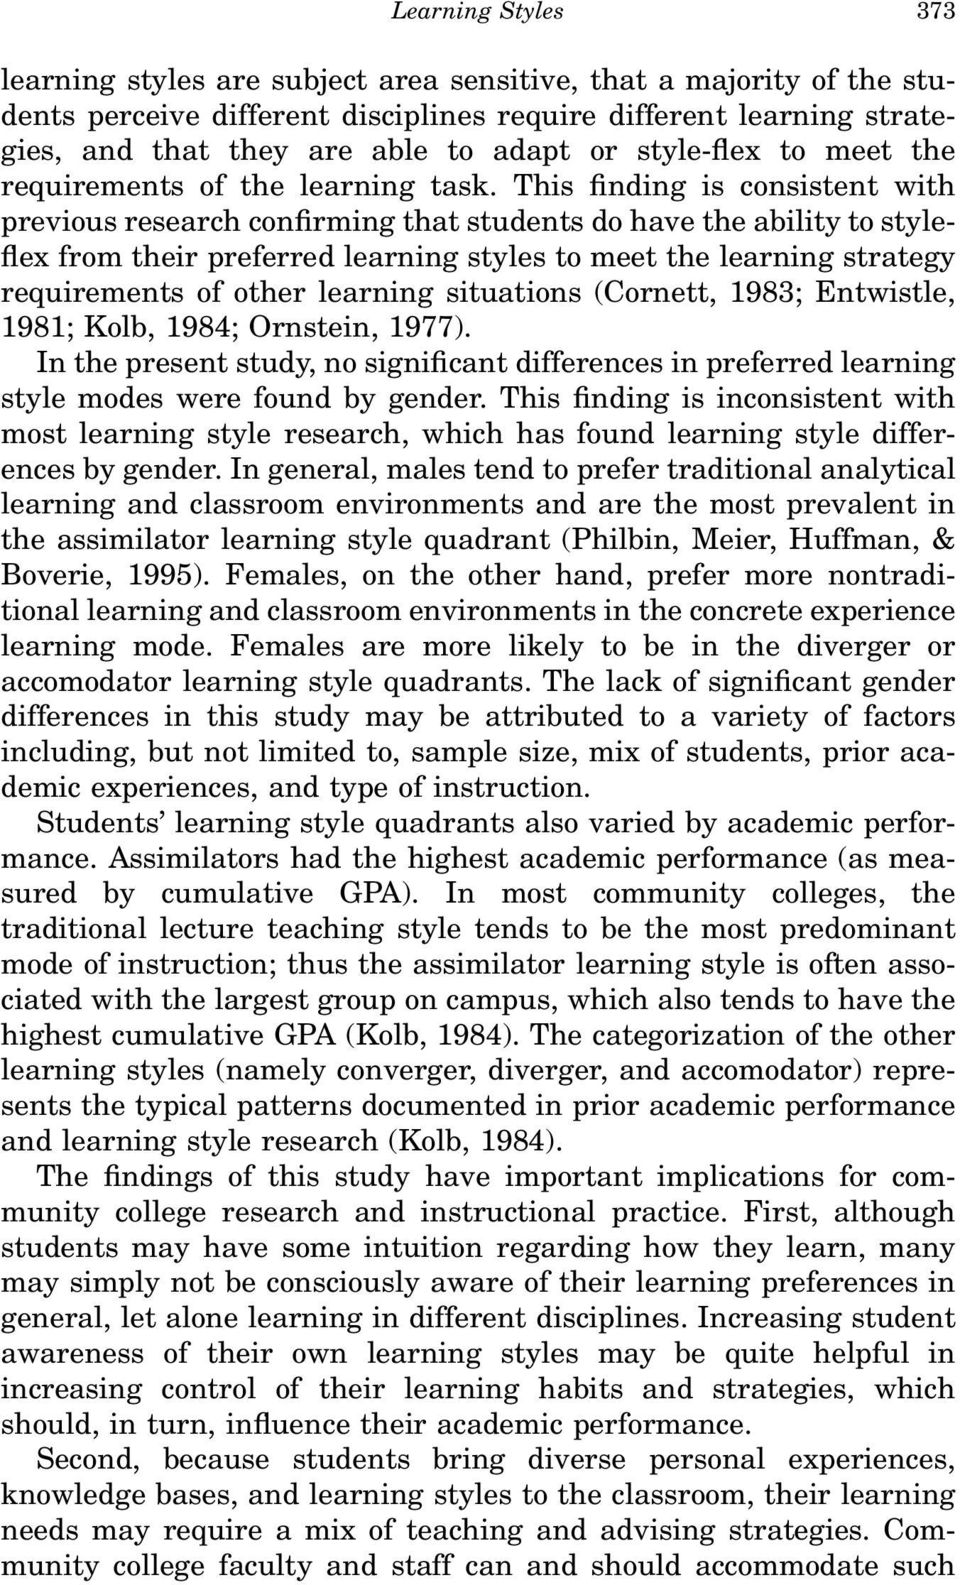 This finding is consistent with previous research confirming that students do have the ability to styleflex from their preferred learning styles to meet the learning strategy requirements of other